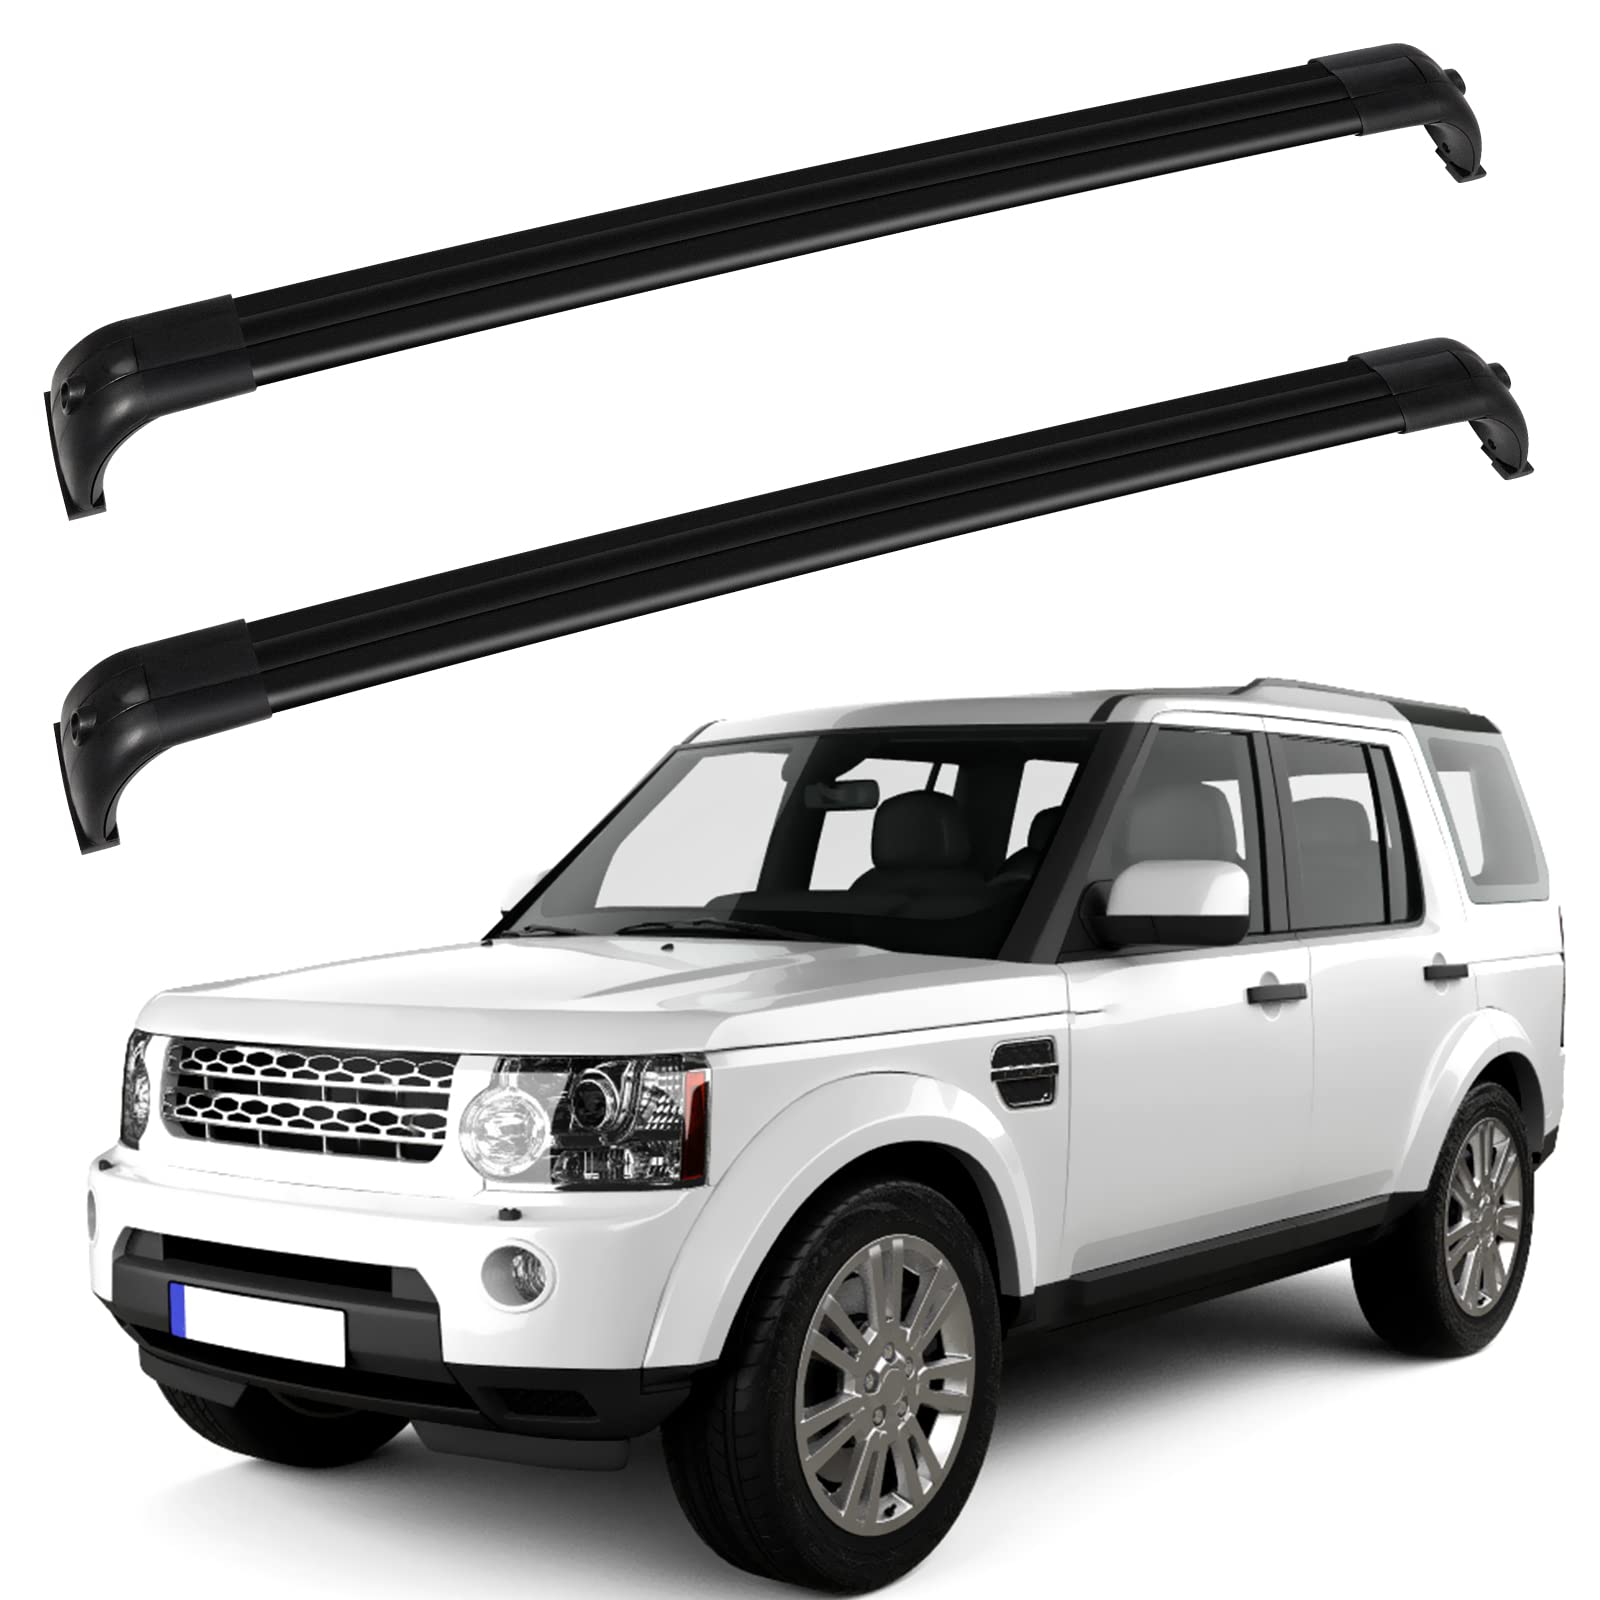 Amazon.com: FINDAUTO Roof Rack Cross Bar for Land Rover LR3 2005-2009,for Land  Rover LR4 2010-2016(Only Fit Models with Existing Roof Rails) Aluminum  Crossbar for Luggage Kayak Bike Cargo Carrier 396LBS/ Black :